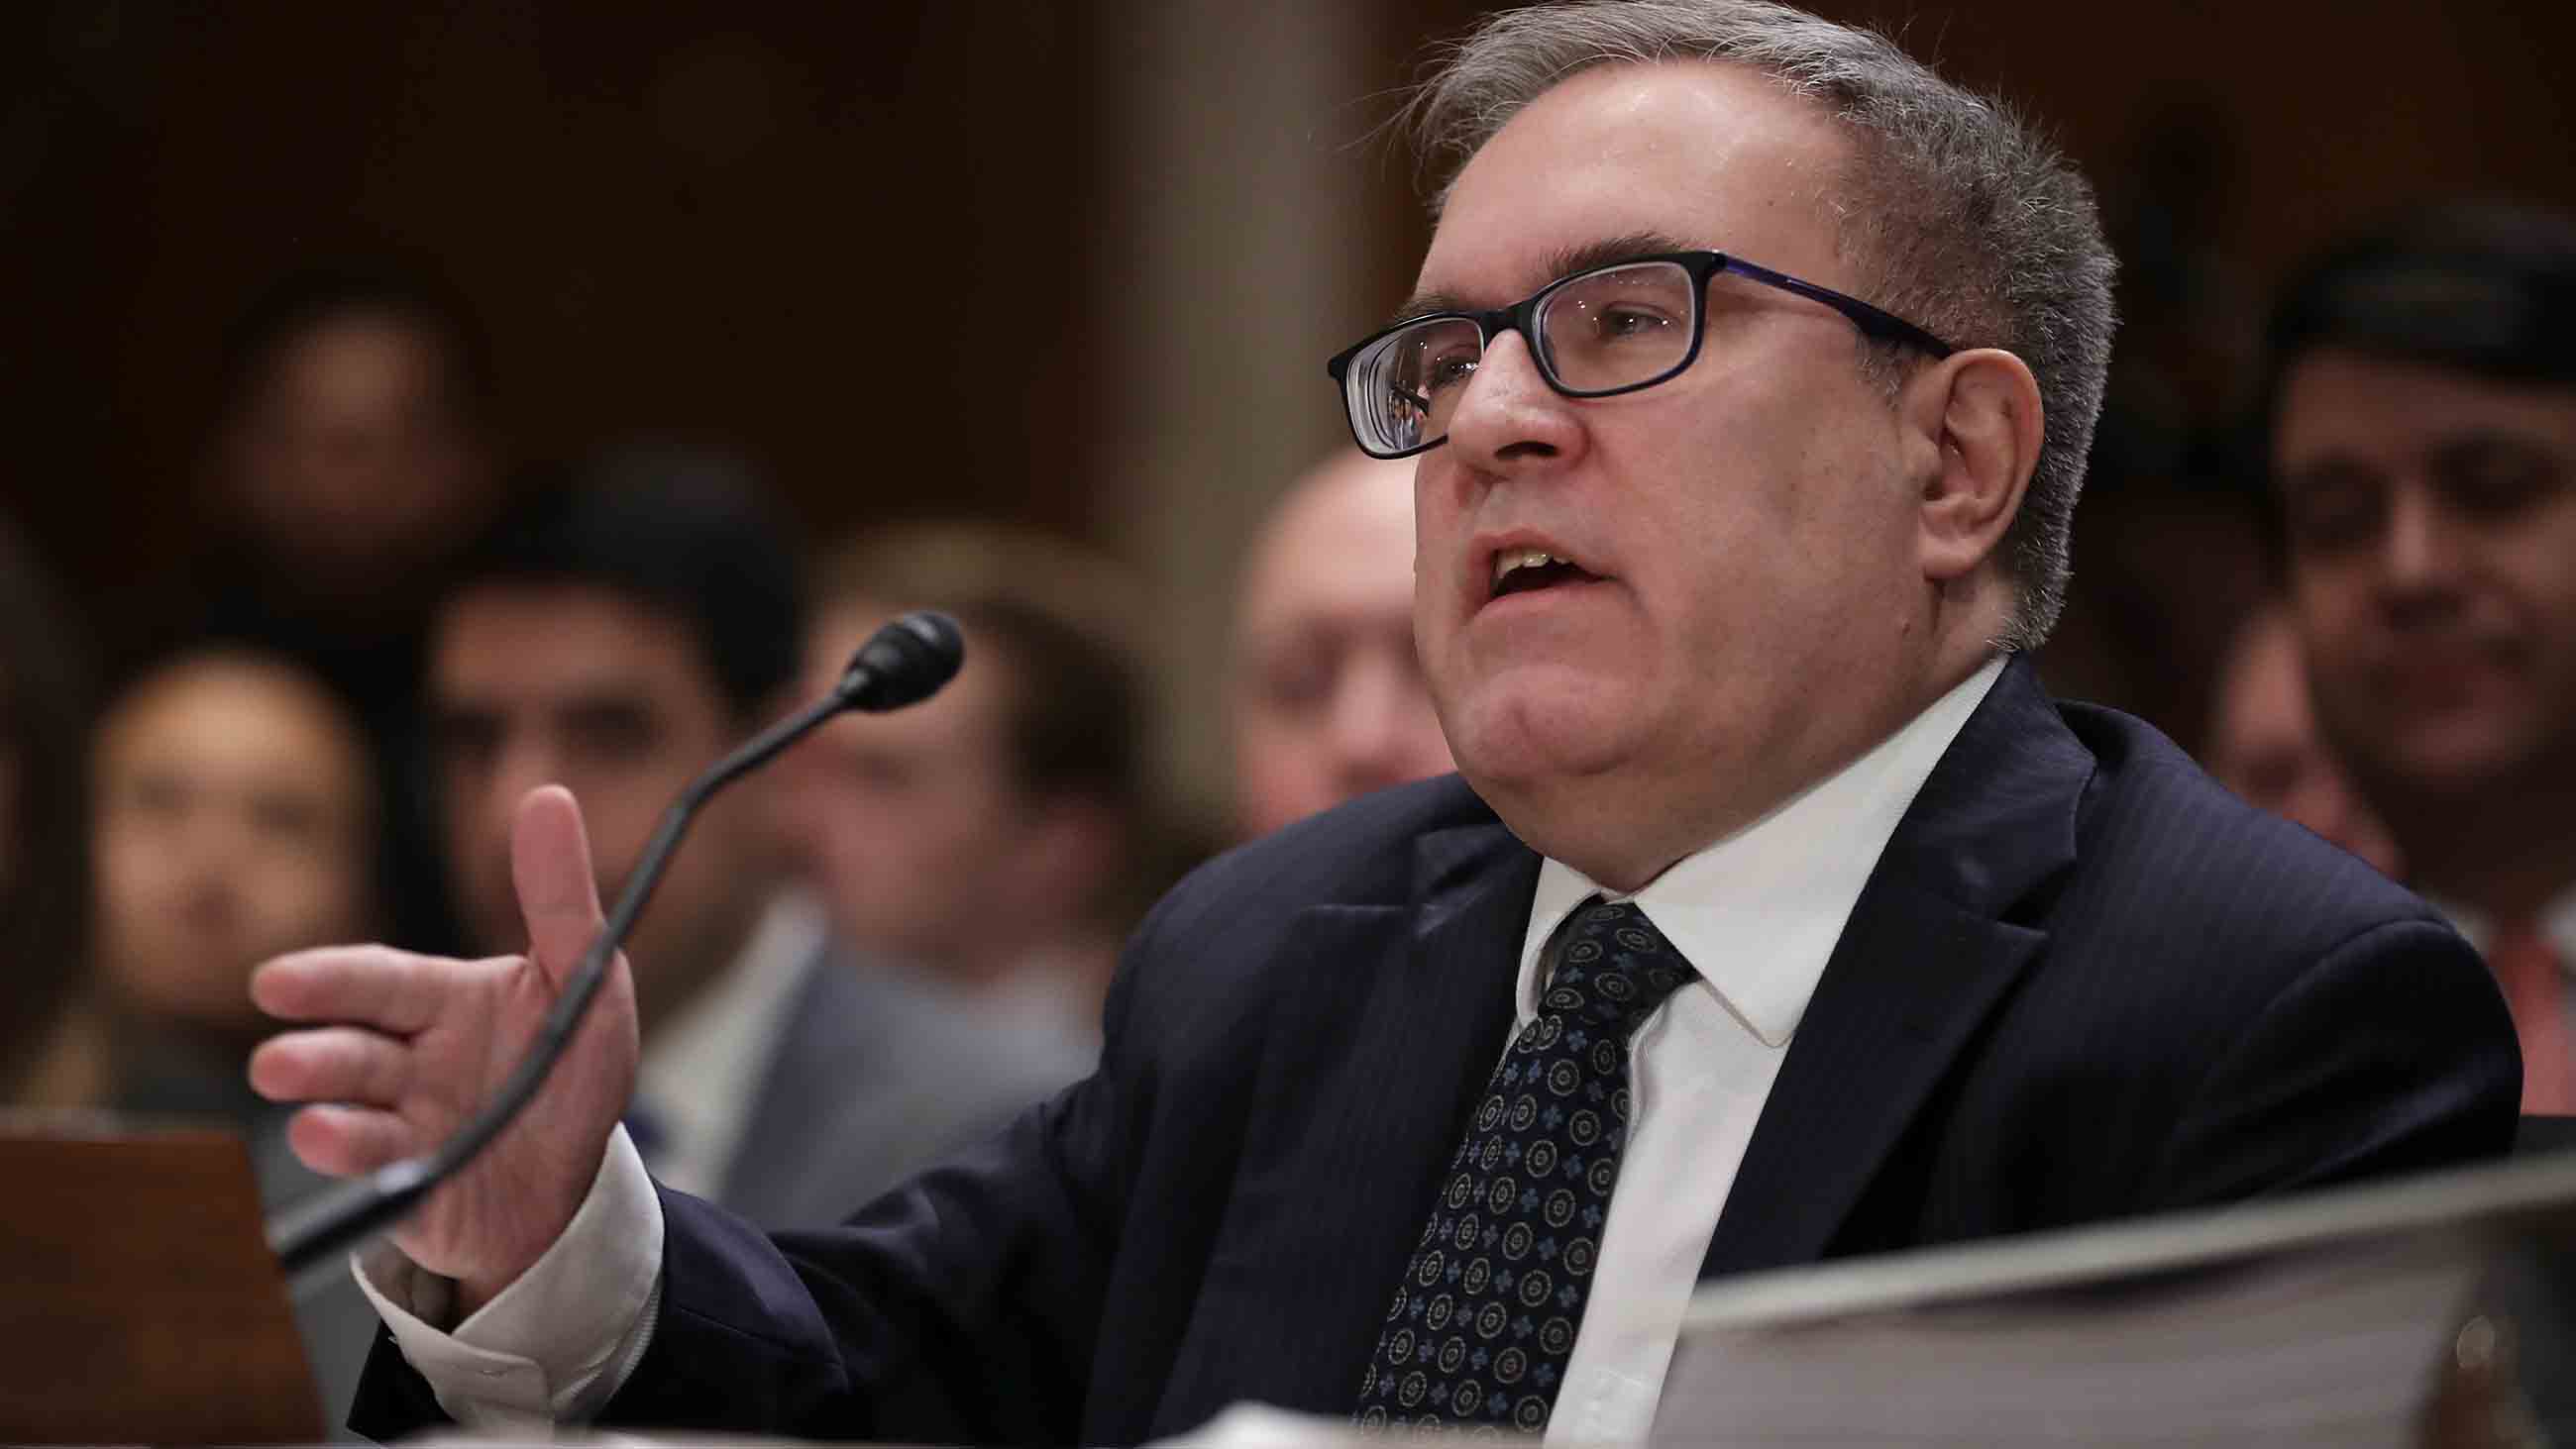 Andrew Wheeler responded to questions Wednesday during his confirmation hearing to become administrator of the U.S. Environmental Protection Agency.